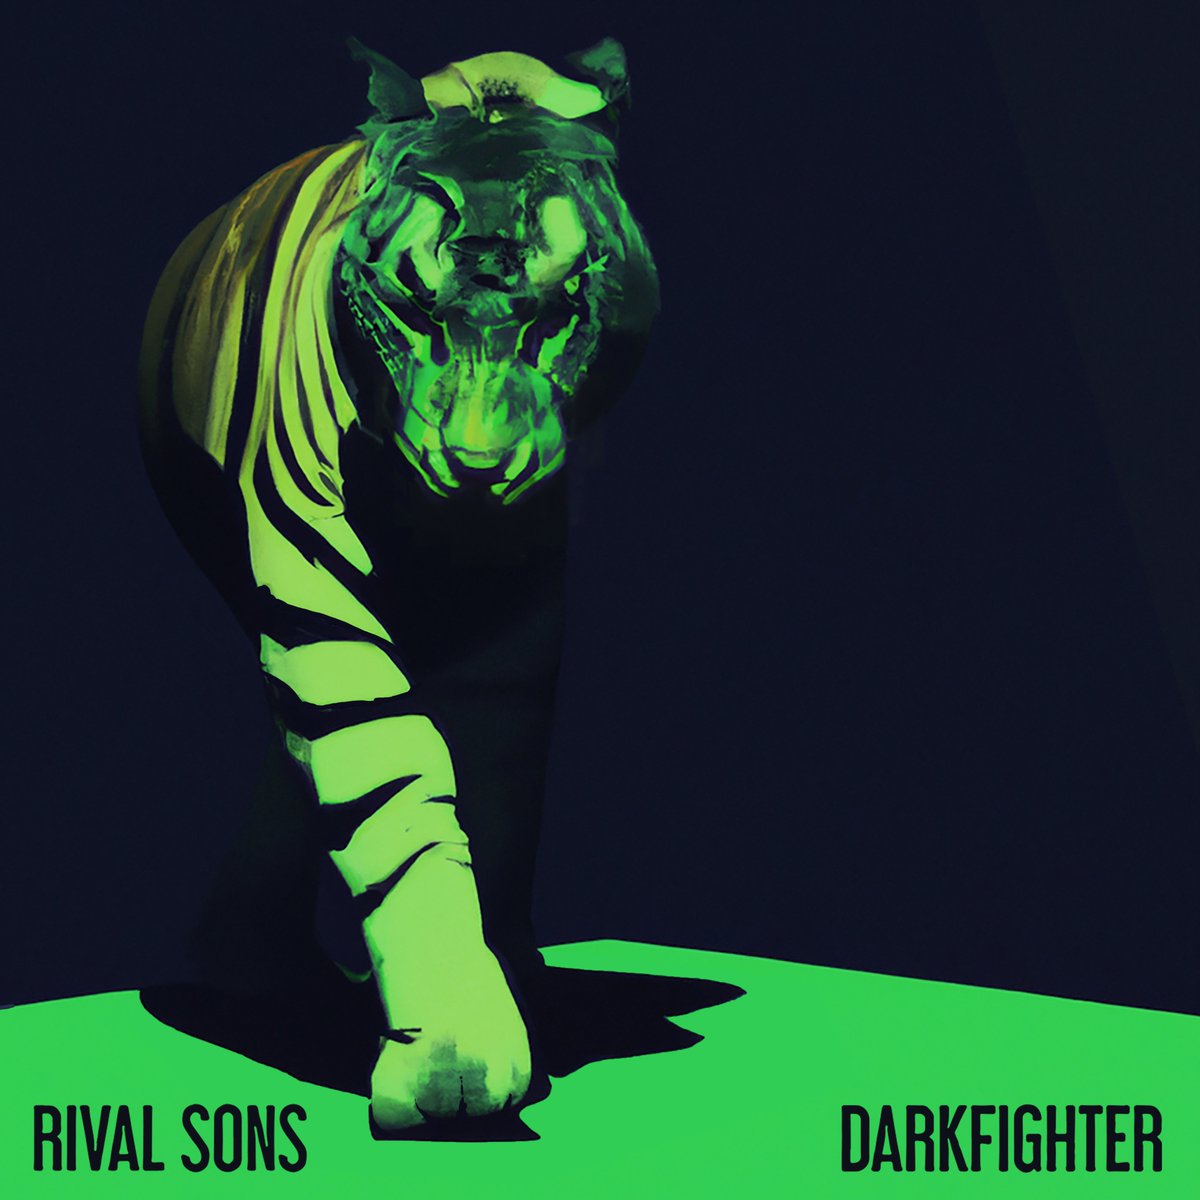 ONE MONTH UNTIL our new album #DARKFIGHTER will be released worldwide through Low Country Sound / Atlantic (June 2nd) - you can pre-order your copy now here: rivalsons.lnk.to/darkfighter - thank you for your support!